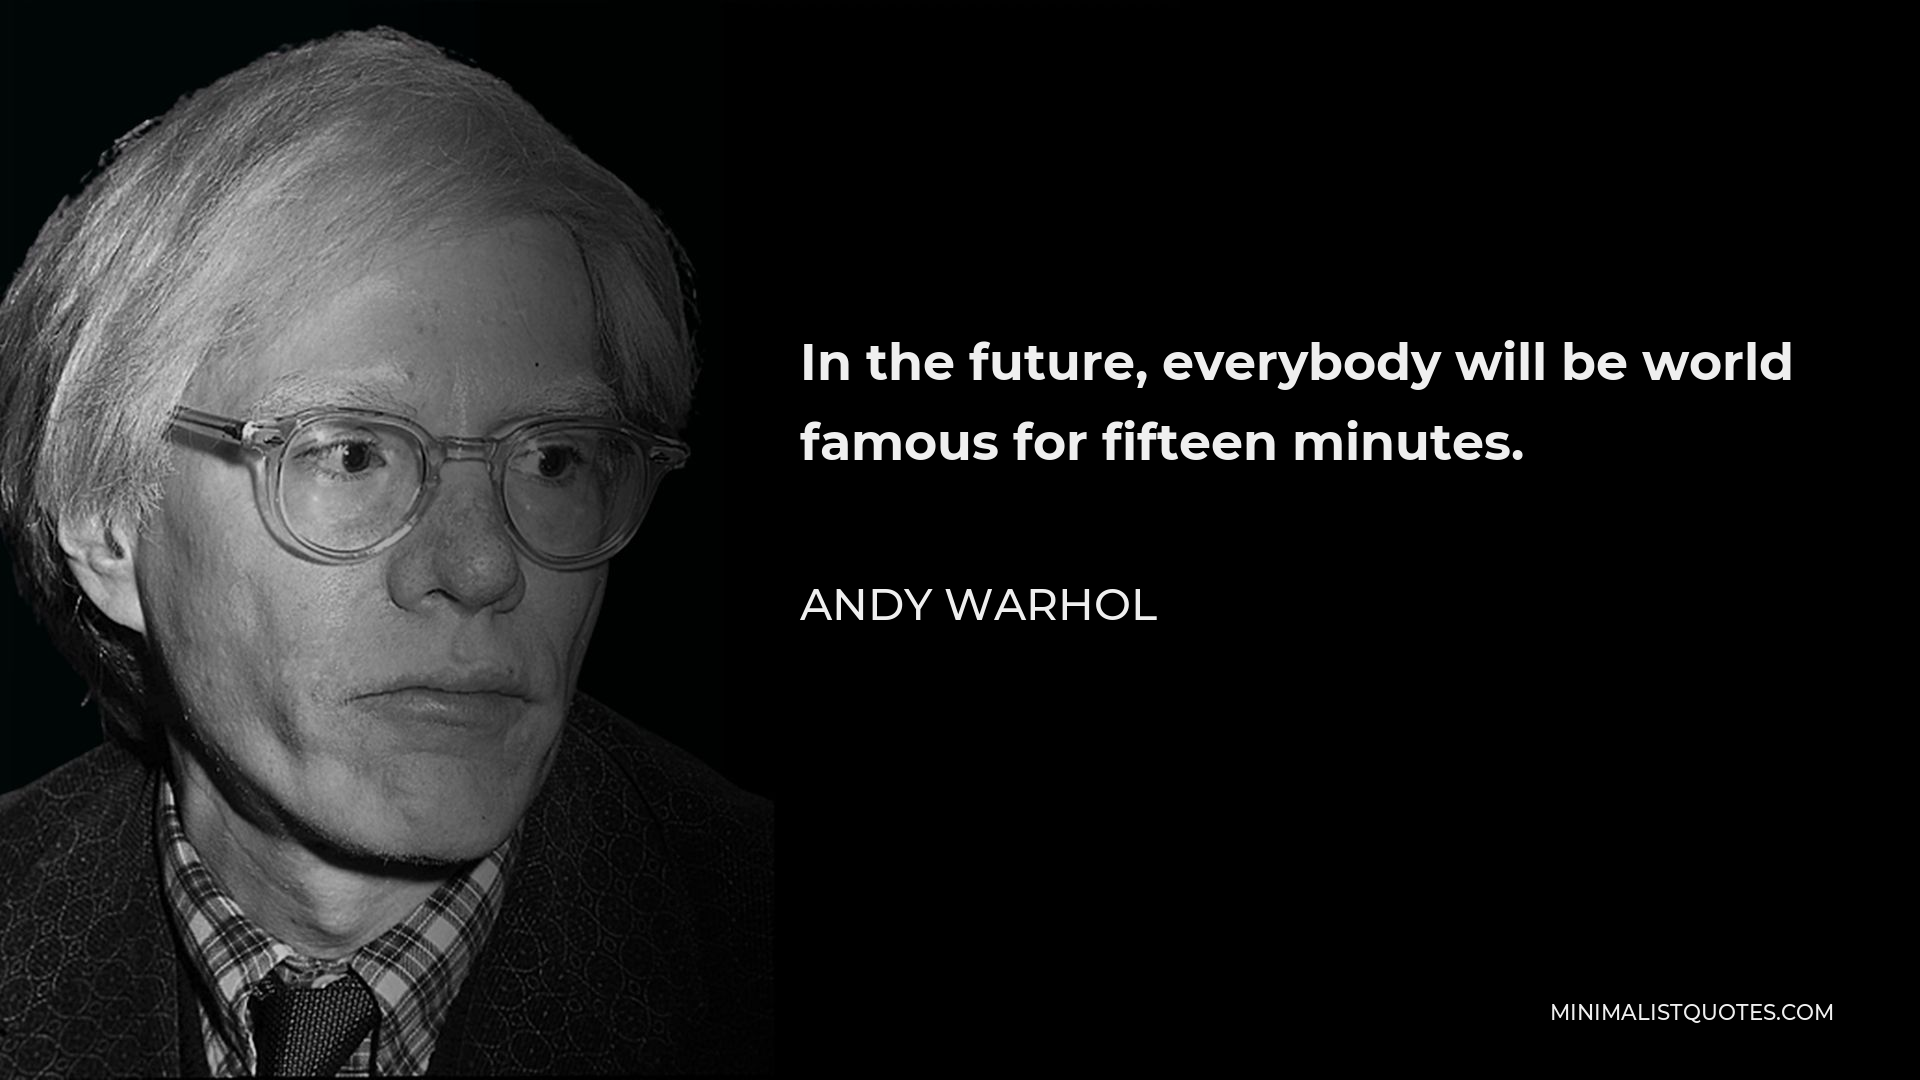 Andy Warhol Quote - In the future, everybody will be world famous for fifteen minutes.